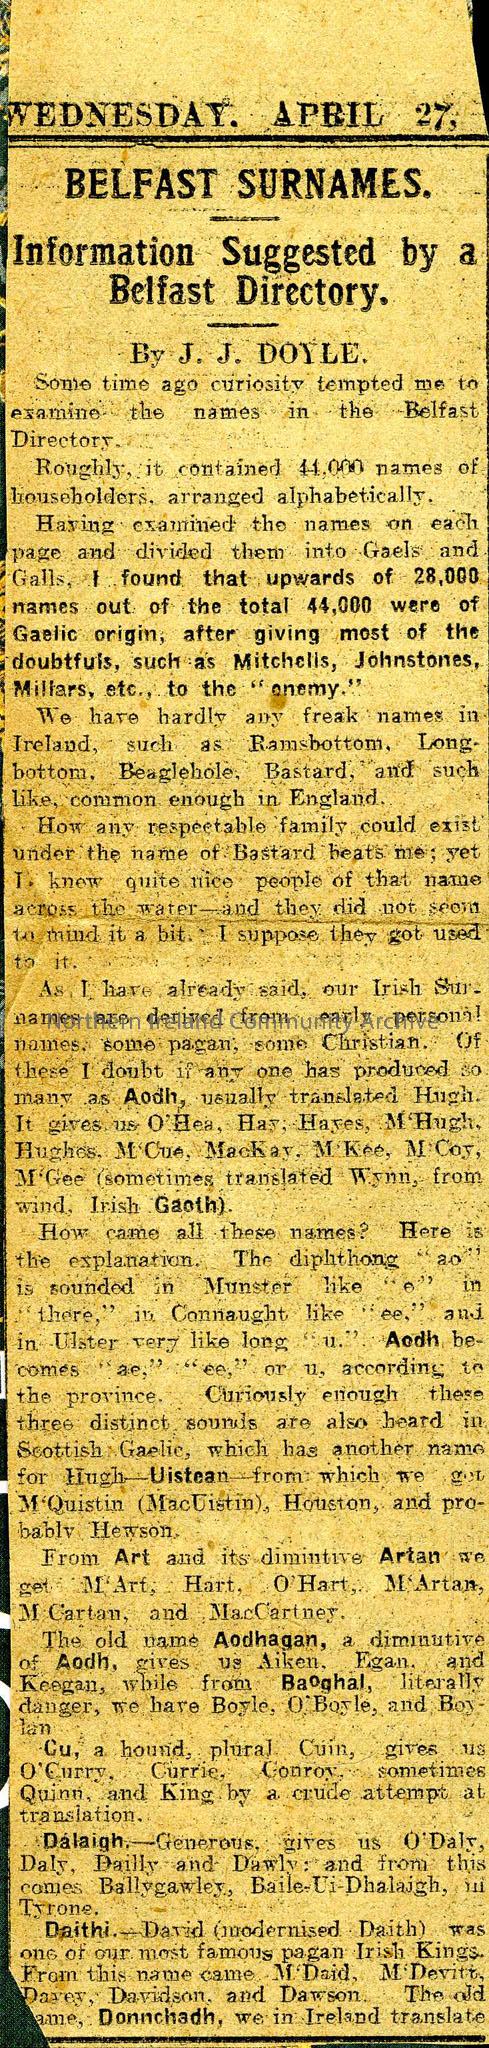 Belfast Surnames – Information Suggested by a Belfast Directory